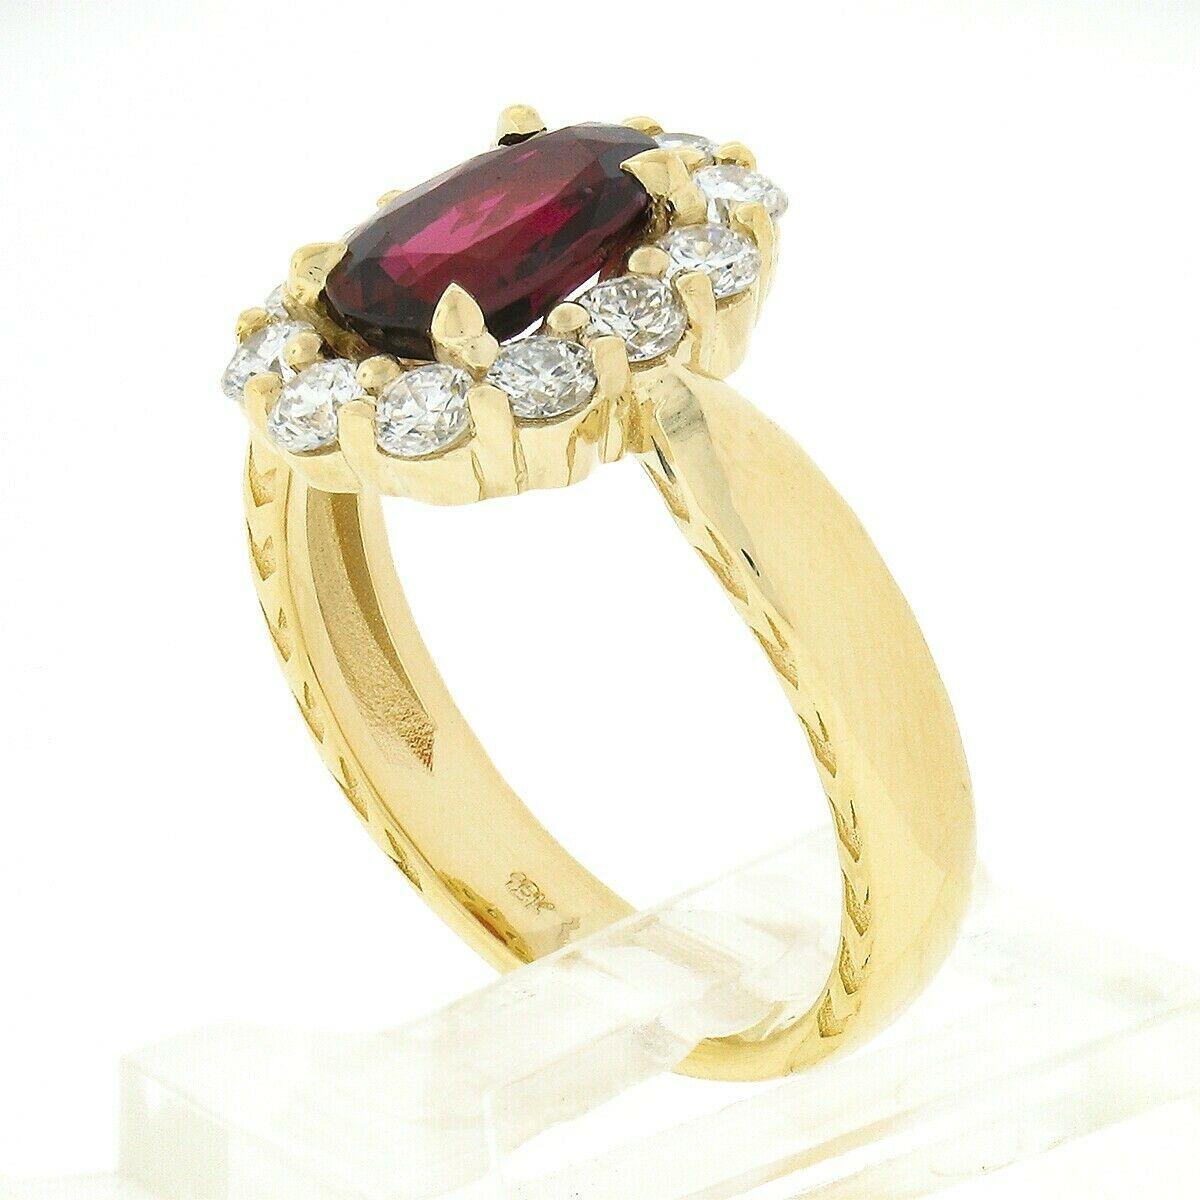 This elegant brand new ruby and diamond halo ring is crafted in solid 18k yellow gold and features a GIA certified natural ruby stone weighing exactly 1.40 carats and displaying a truly rich blood red color. The ruby has a beautiful and unique